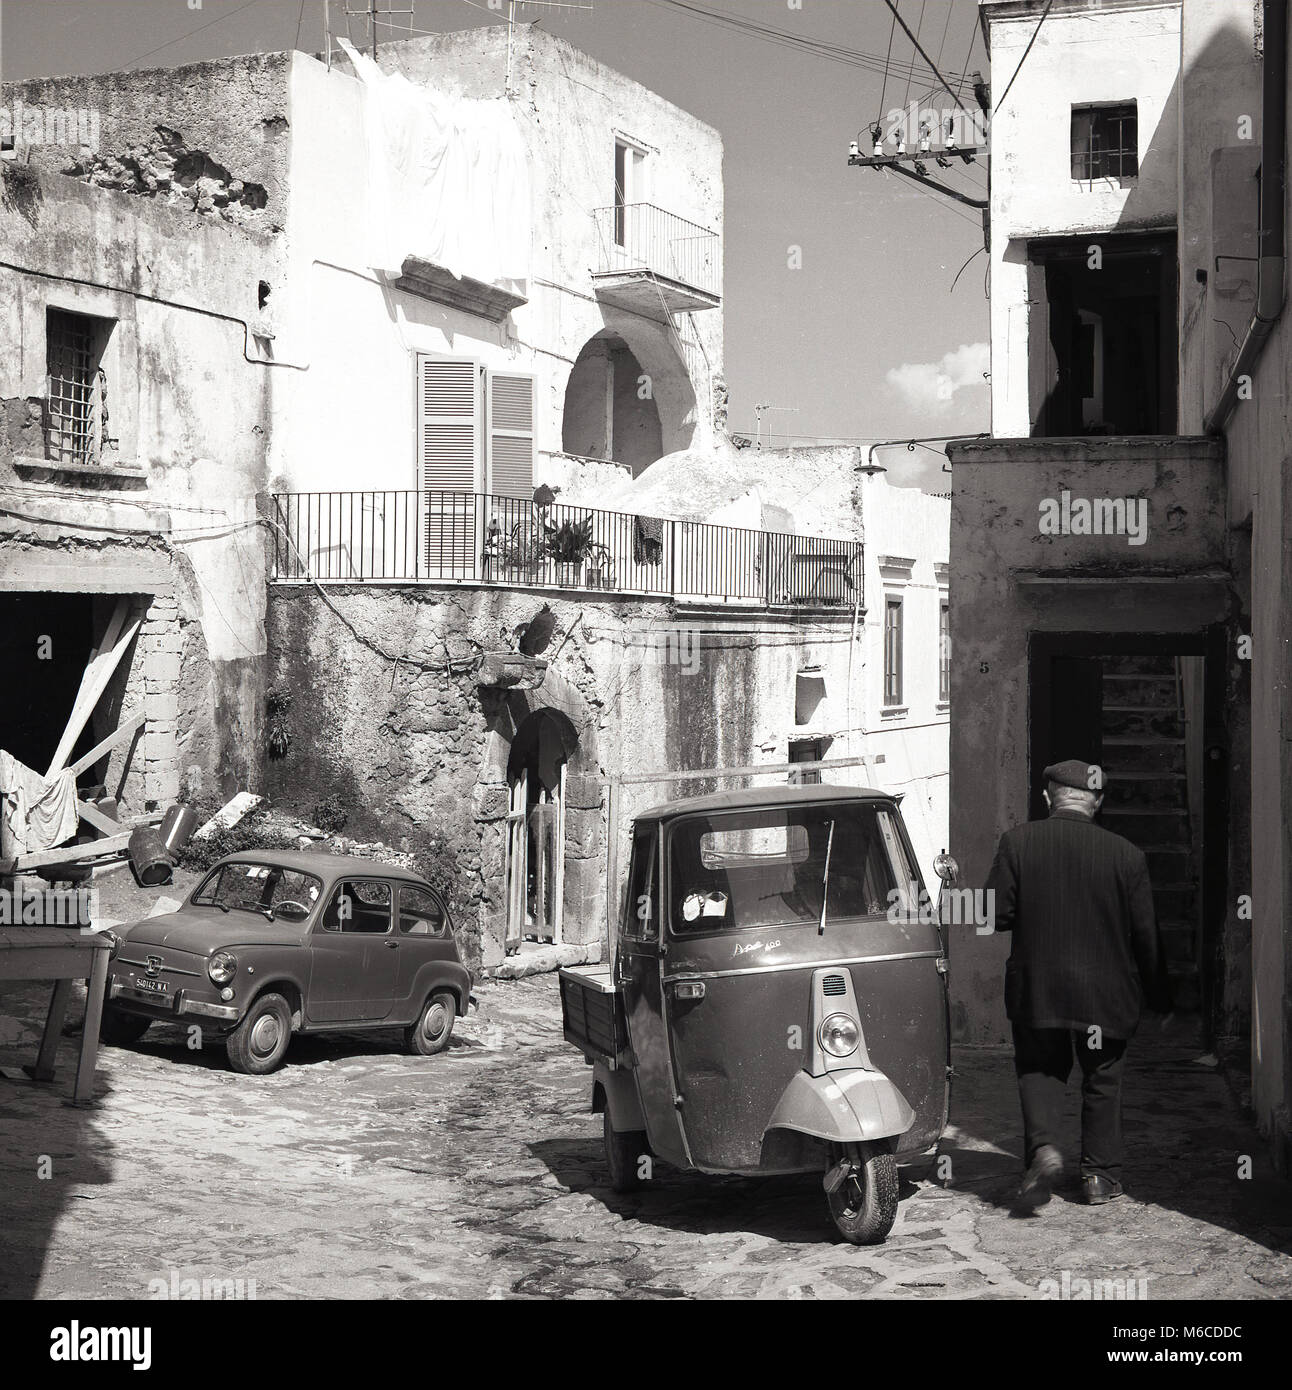 1950s, historical, summertime and a tight narrow sidestreet with Italian vehicles of the era, a small fiat 'bubble car' and a 'vespaCar', a three-wheeled delivery van, a Piaggio Ape 400, parked on the uneven cobbles, on the mediterranean island of Elba,Tuscany, Italy, Stock Photo